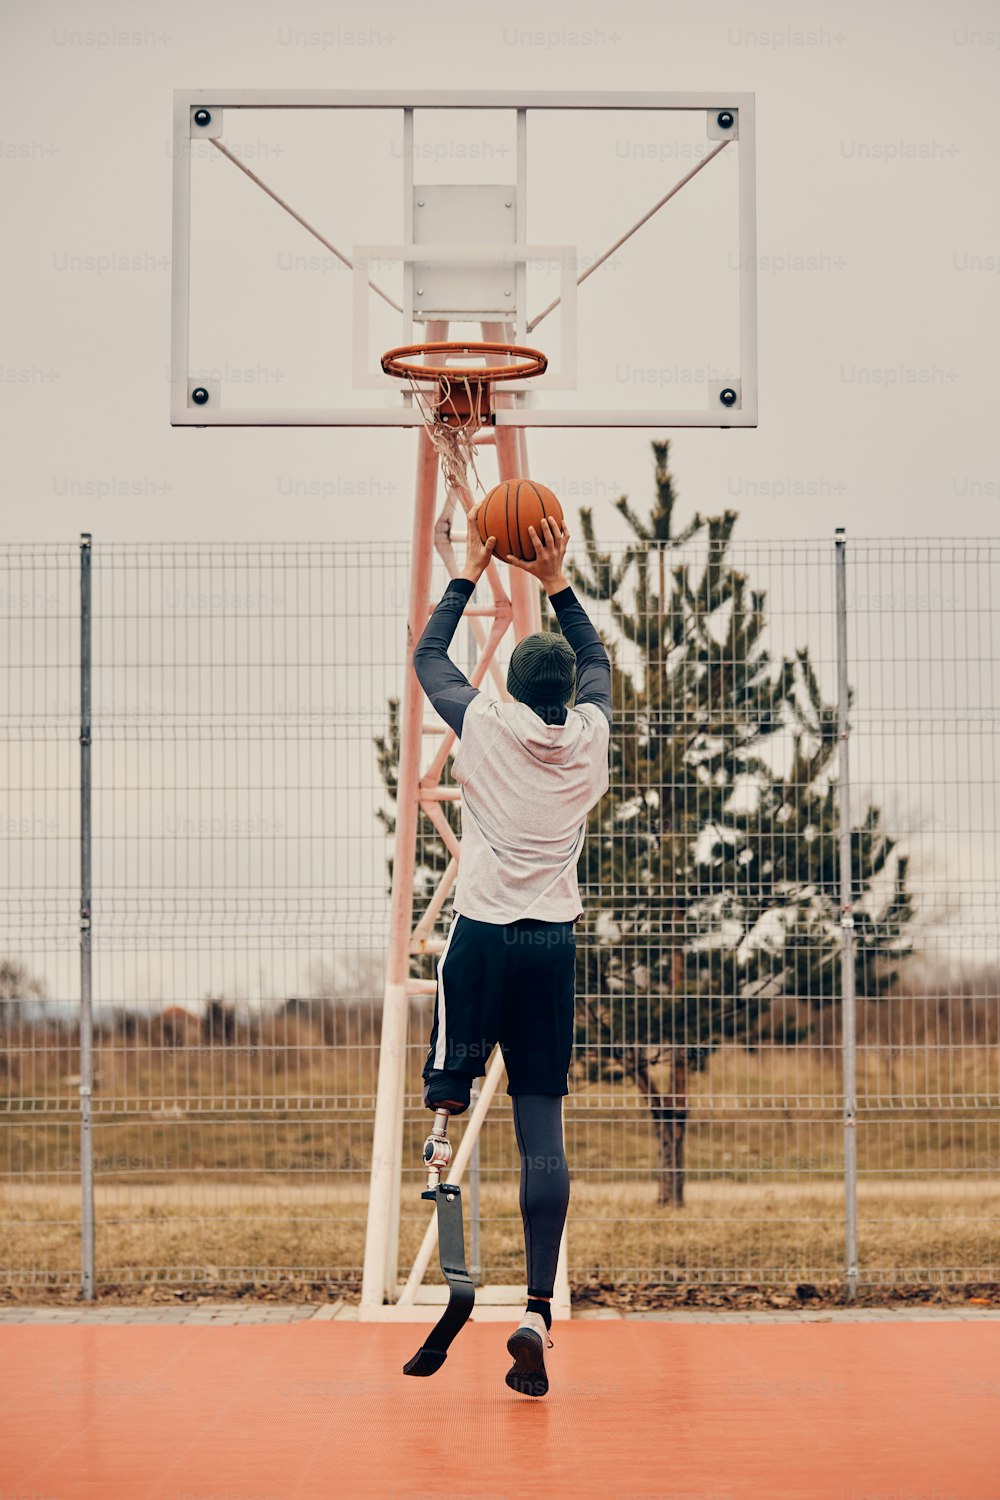 Rear view of basketball player with prosthetic leg taking a shot while practicing on outdoors sports court.